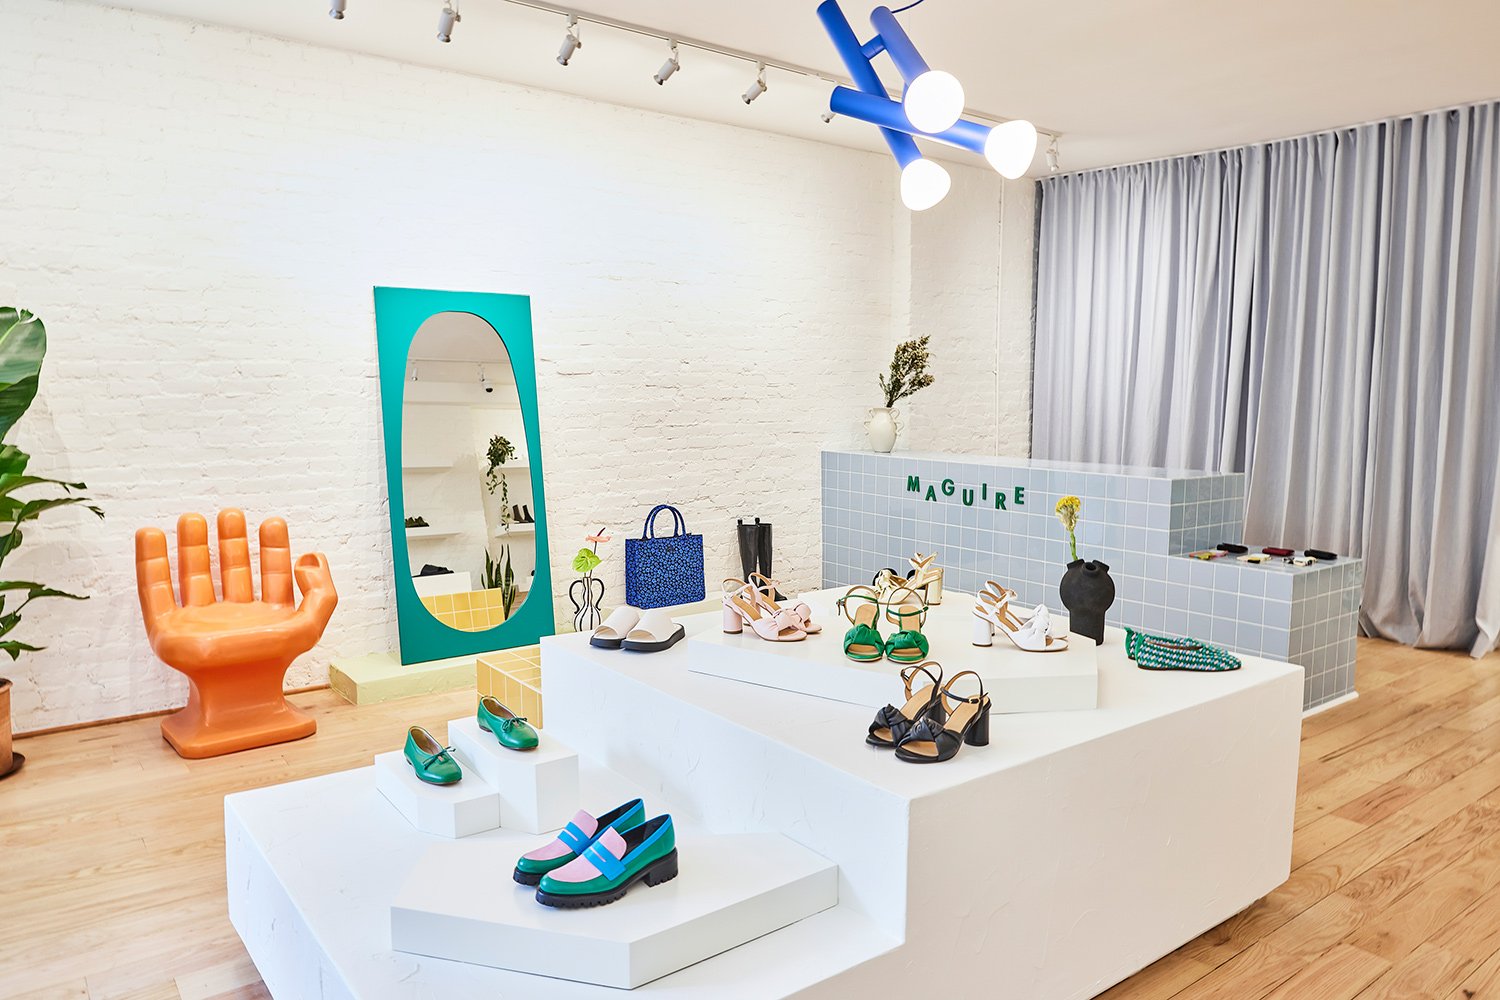 Montreal Footwear Brand Maguire Is Making Its Mark on New York City thumbnail